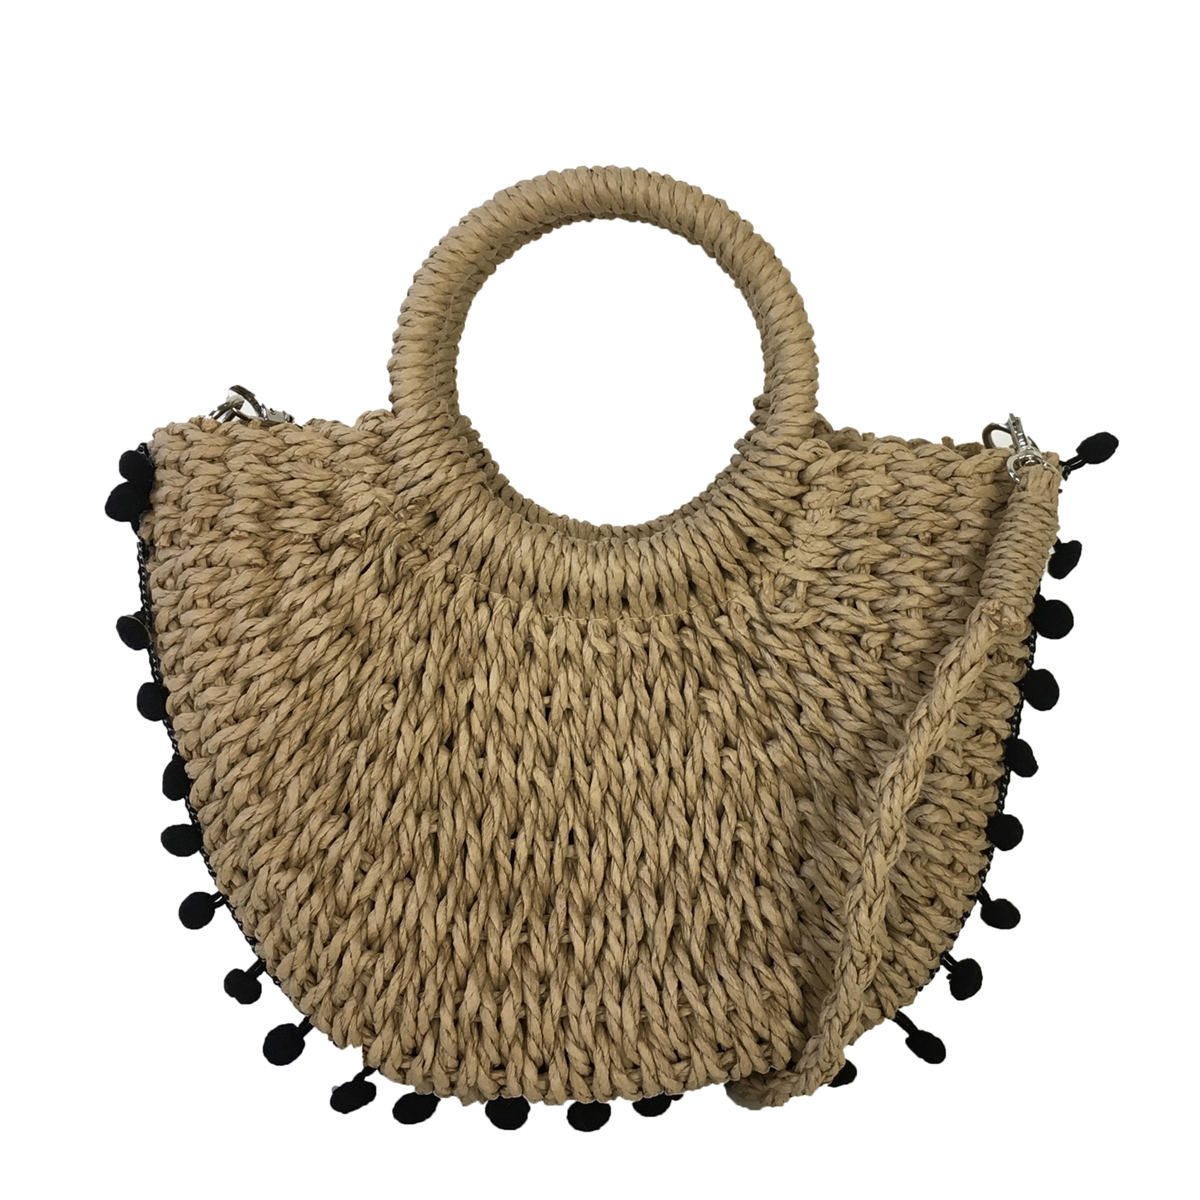 Eliza Large Woven Straw Tote Bag